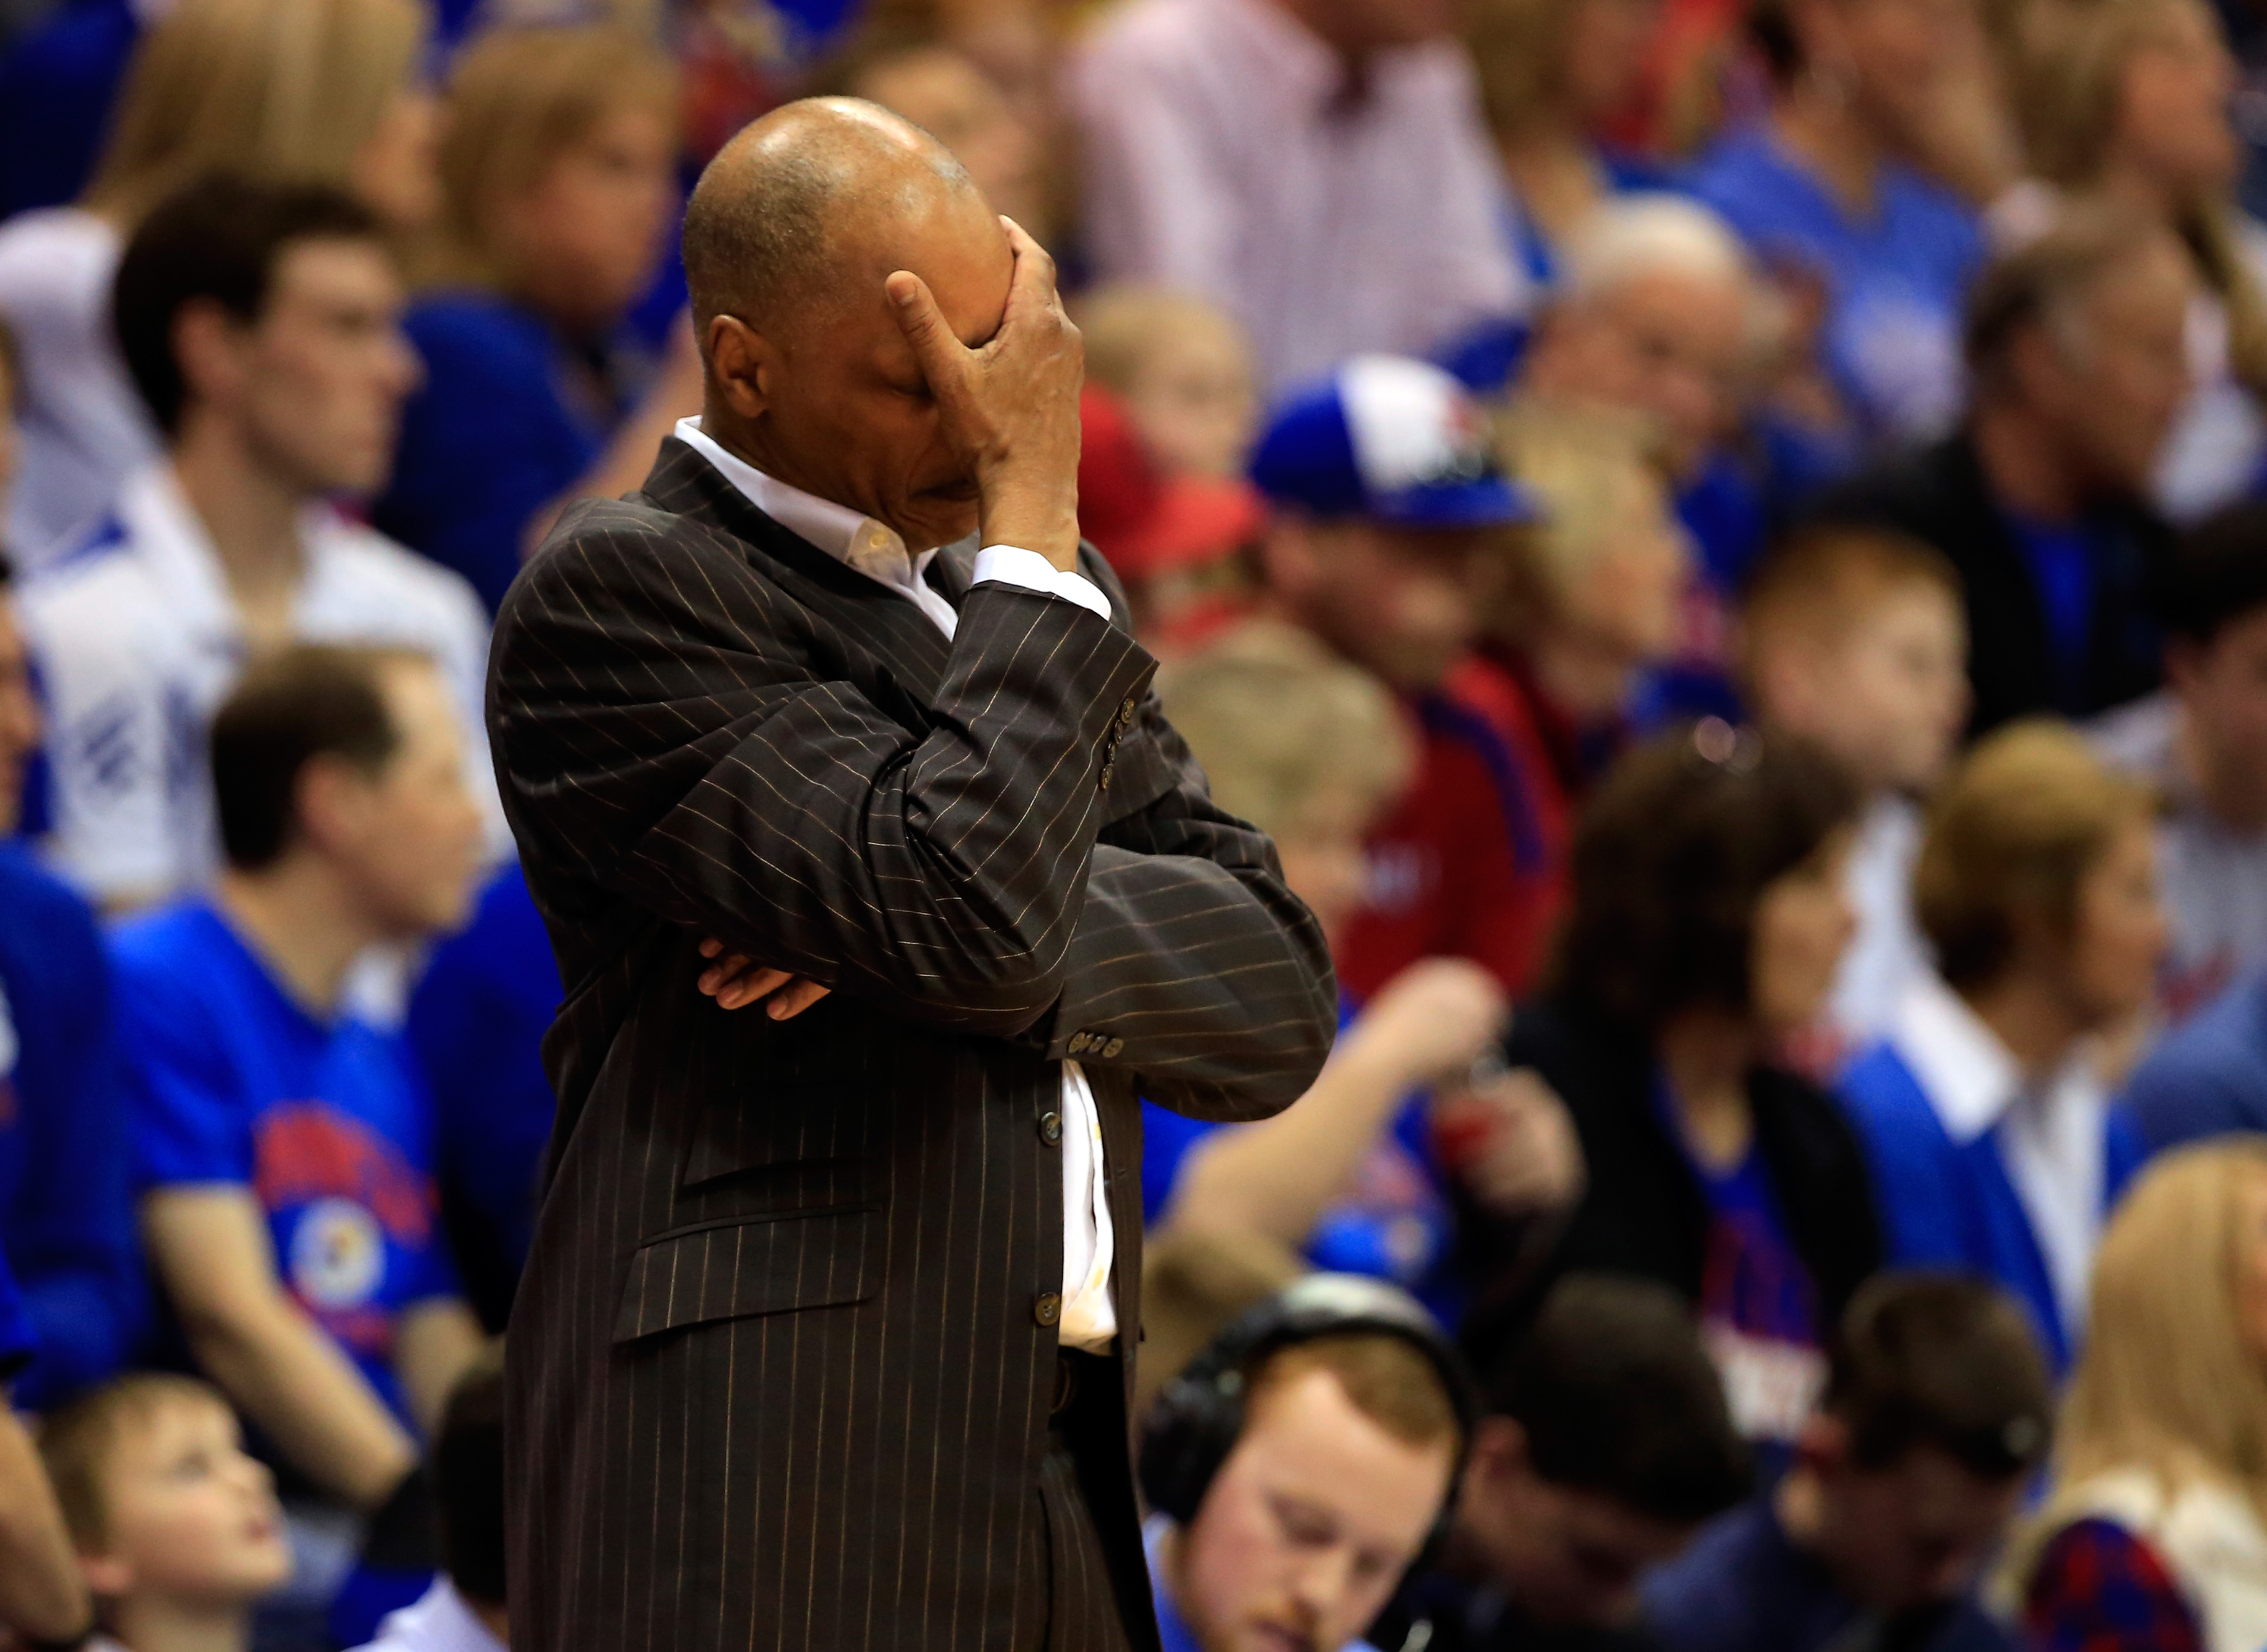 LAWRENCE, KS - FEBRUARY 21: Head coach Trent Johnson of the TCU Horned Frogs reacts during the second half of the game against the Kansas Jayhawks at Allen Fieldhouse on February 21, 2015 in Lawrence, Kansas. (Photo by Jamie Squire/Getty Images)